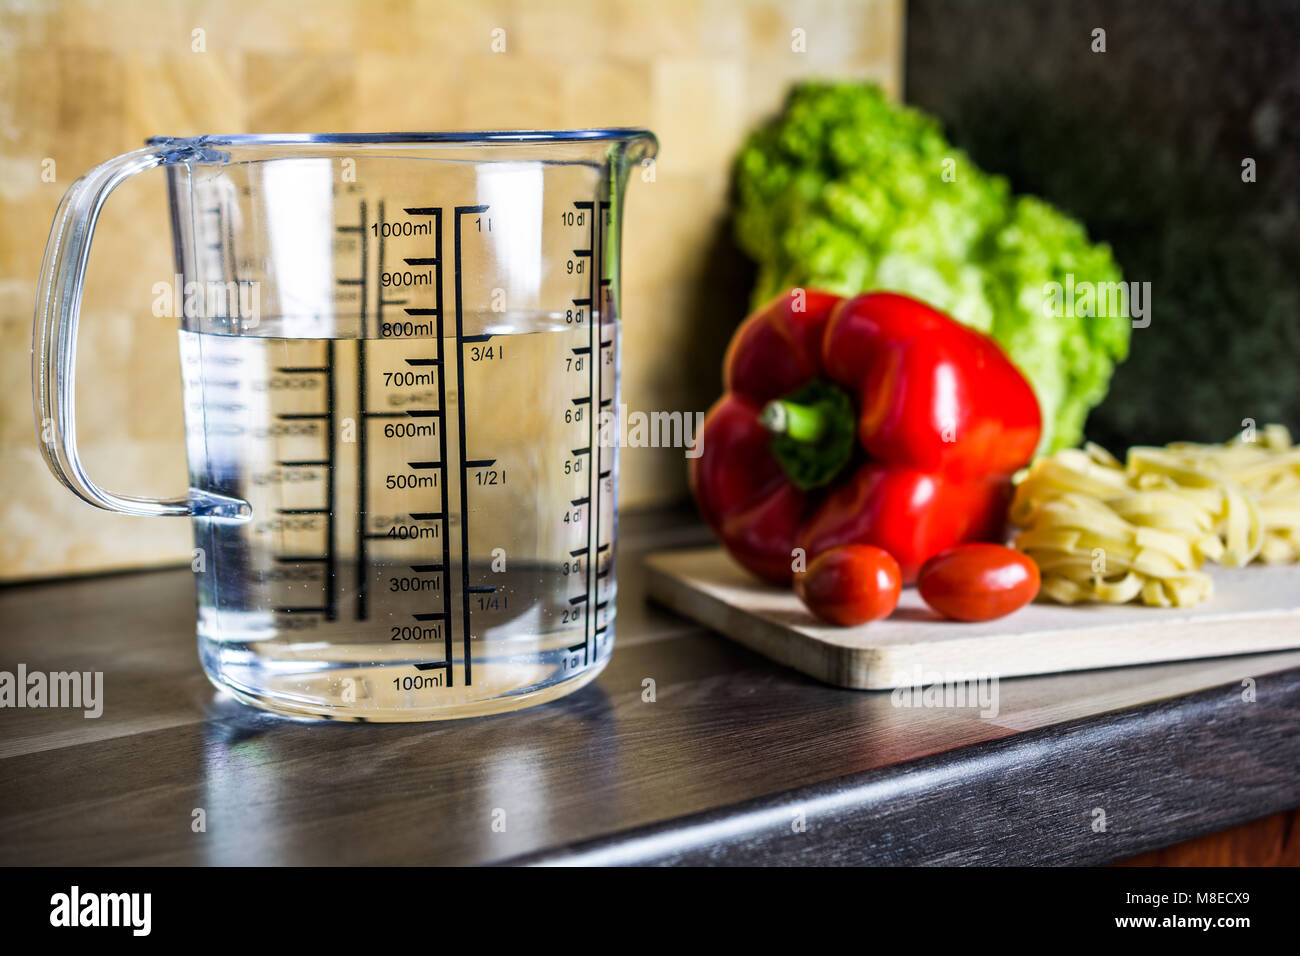 750ccm / 3/4 Liter / 750ml Of Water In A Measuring Cup On A Kitchen Counter  With Food Stock Photo - Alamy